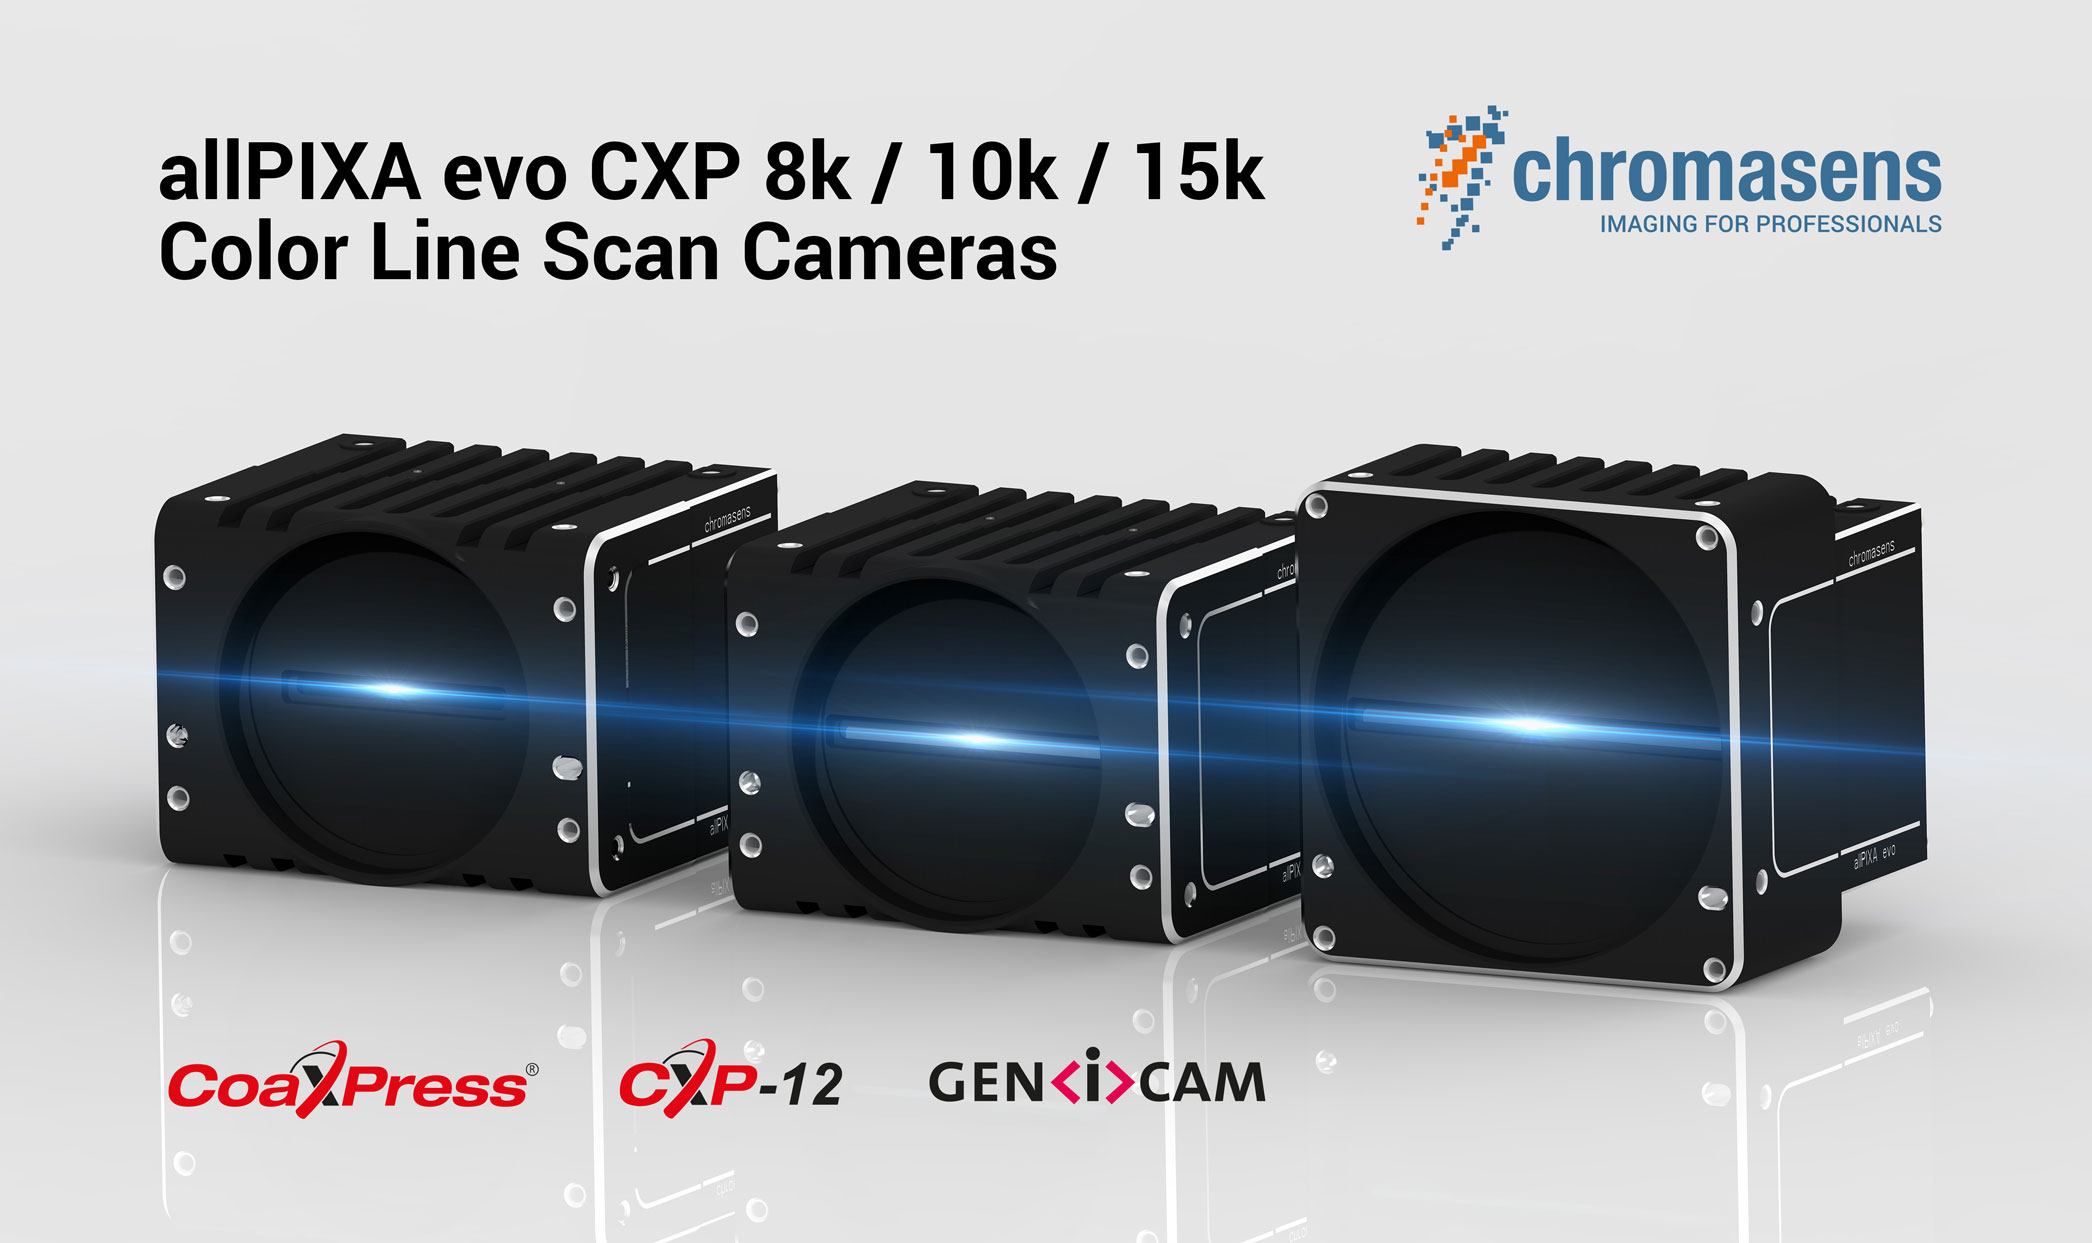 Chromasens Expands allPIXA evo Camera Series with New CoaXPress Versions to Unleash Full Speed of Multi-line Sensors